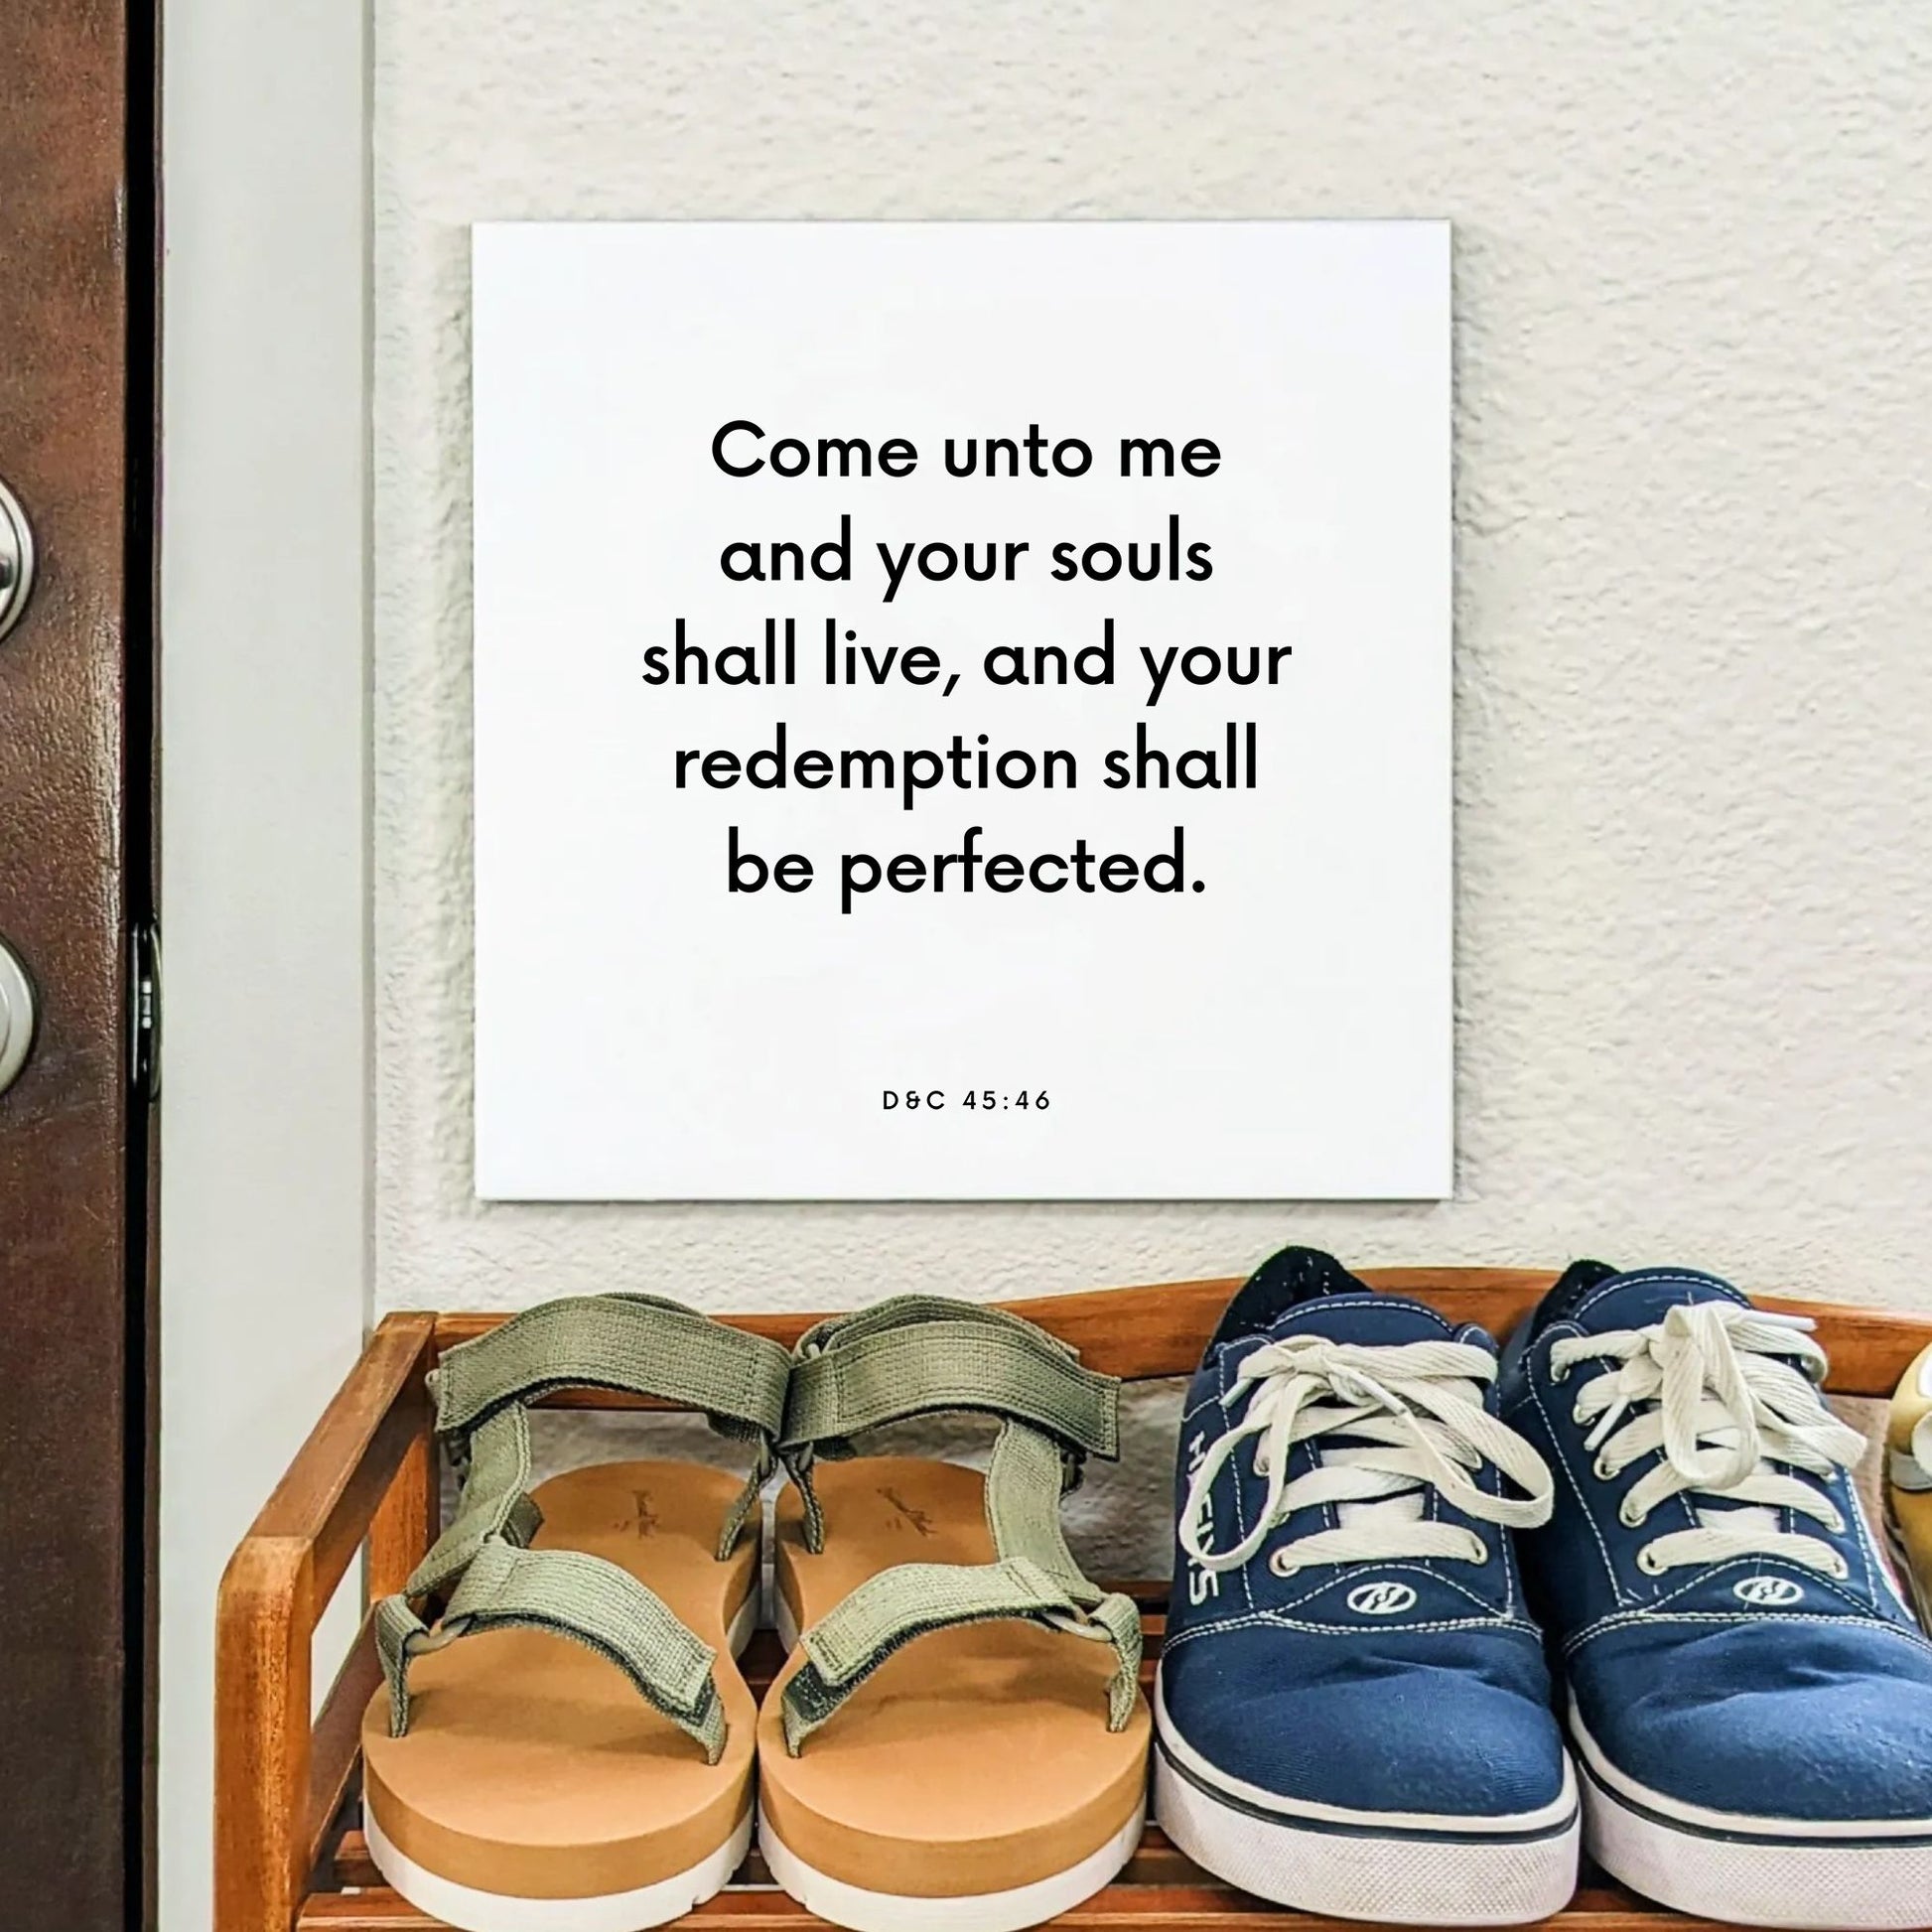 Shoes mouting of the scripture tile for D&C 45:46 - "Come unto me and your souls shall live"